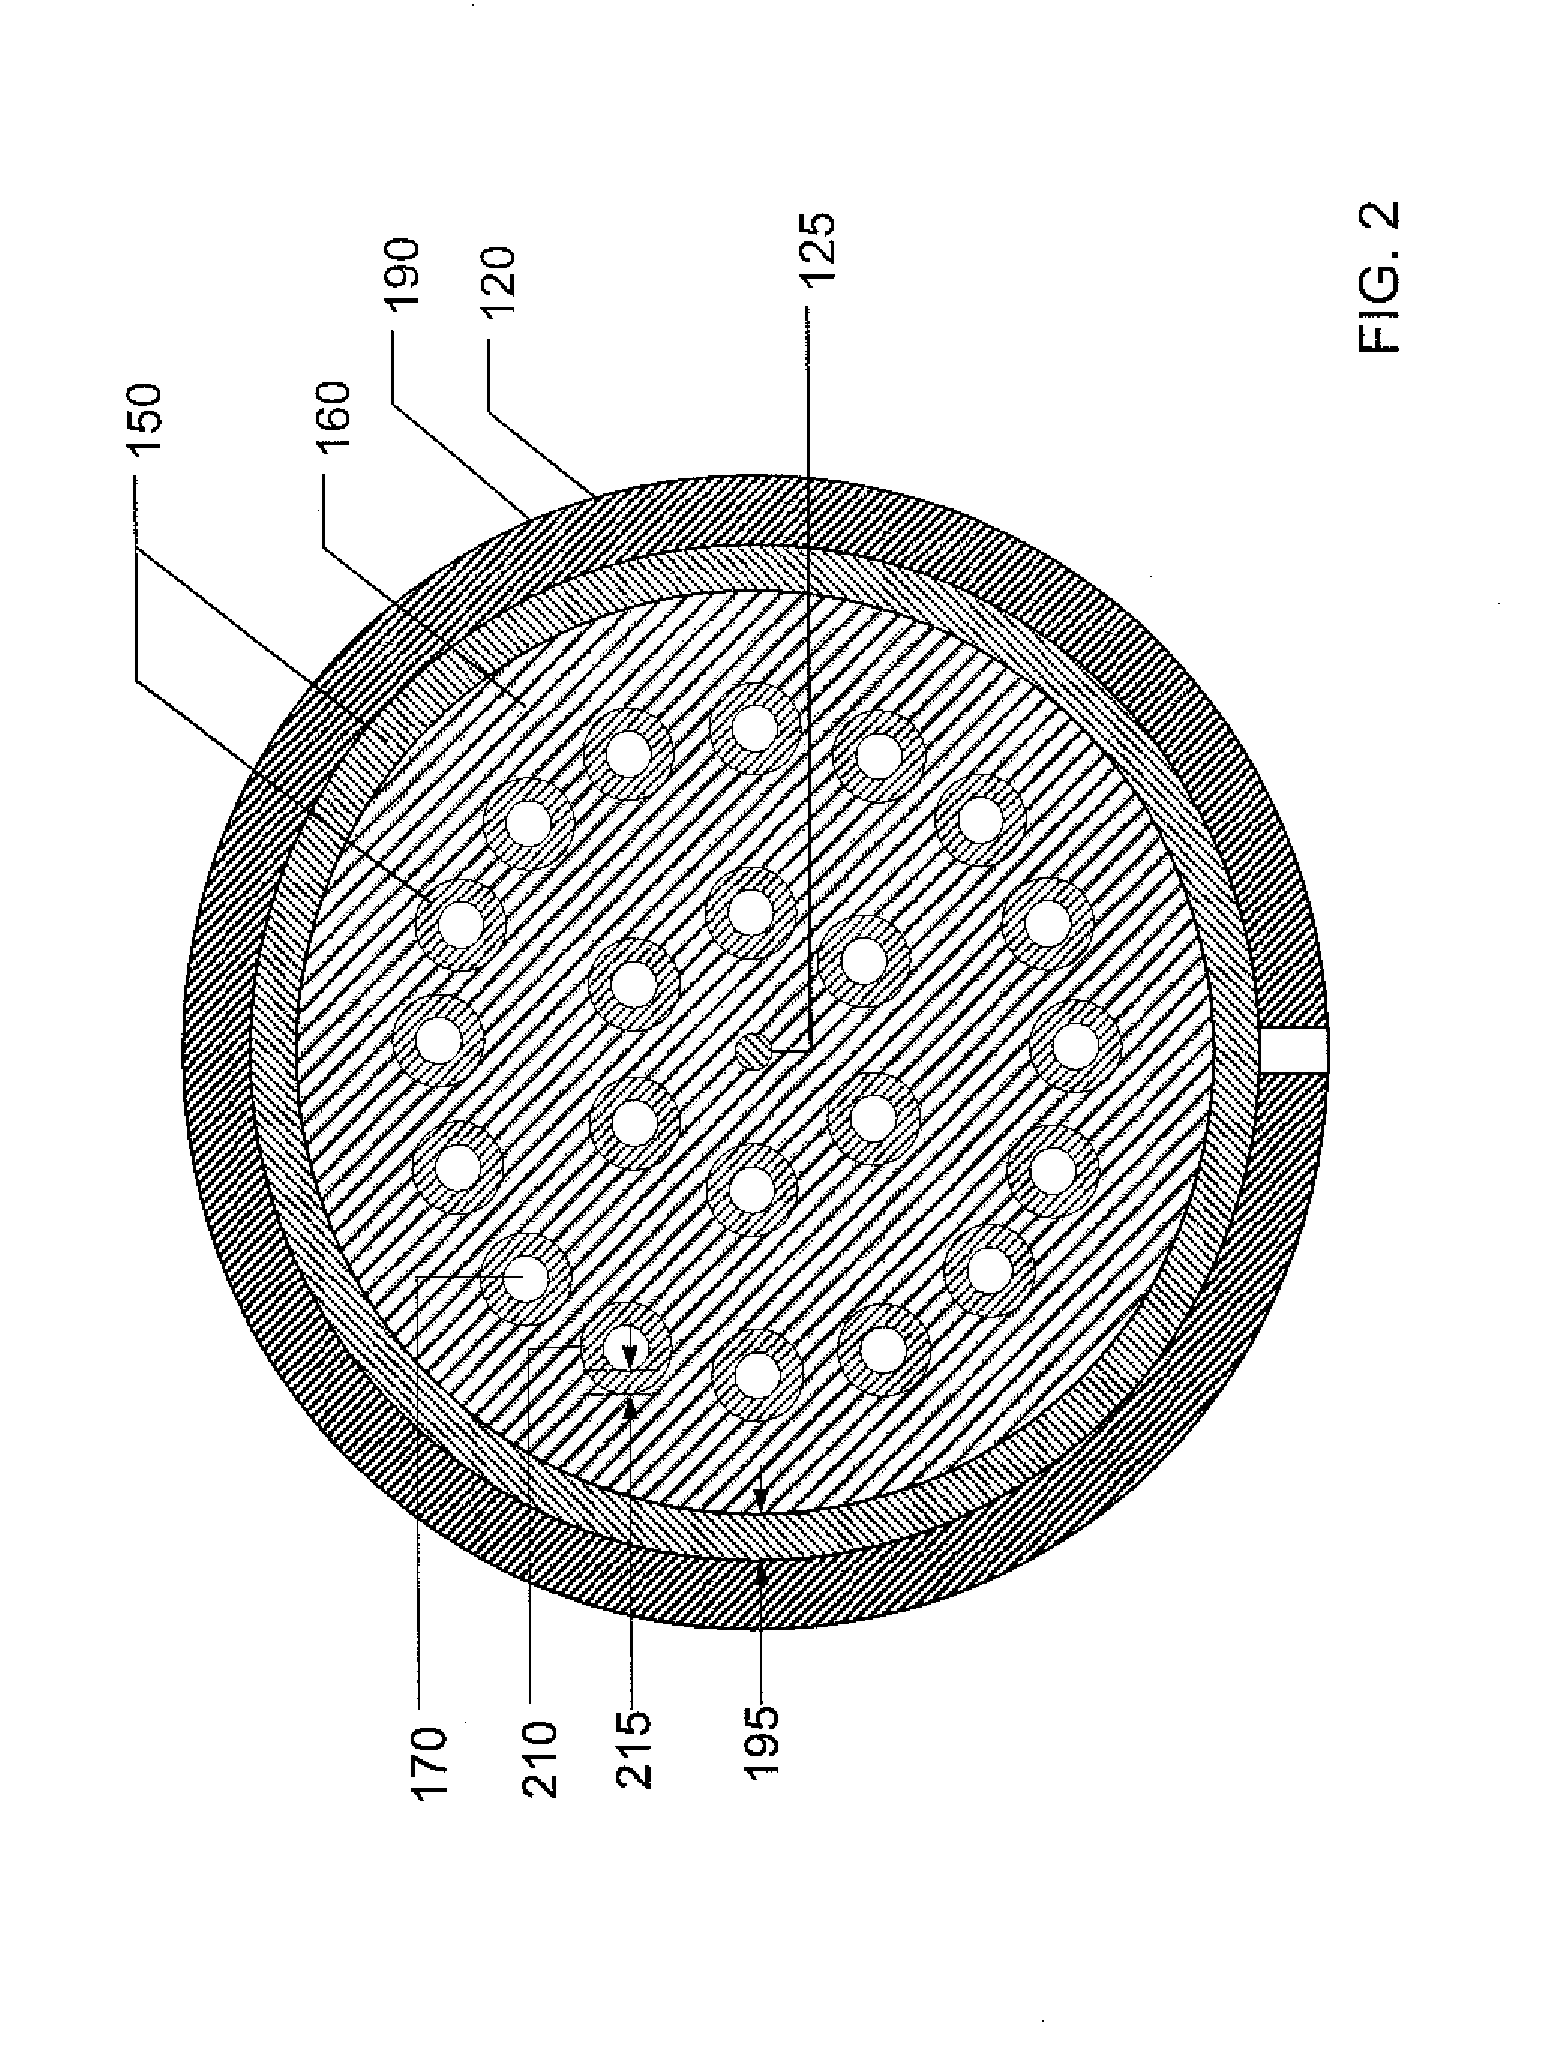 Method and apparatus for generating vapor at high rates